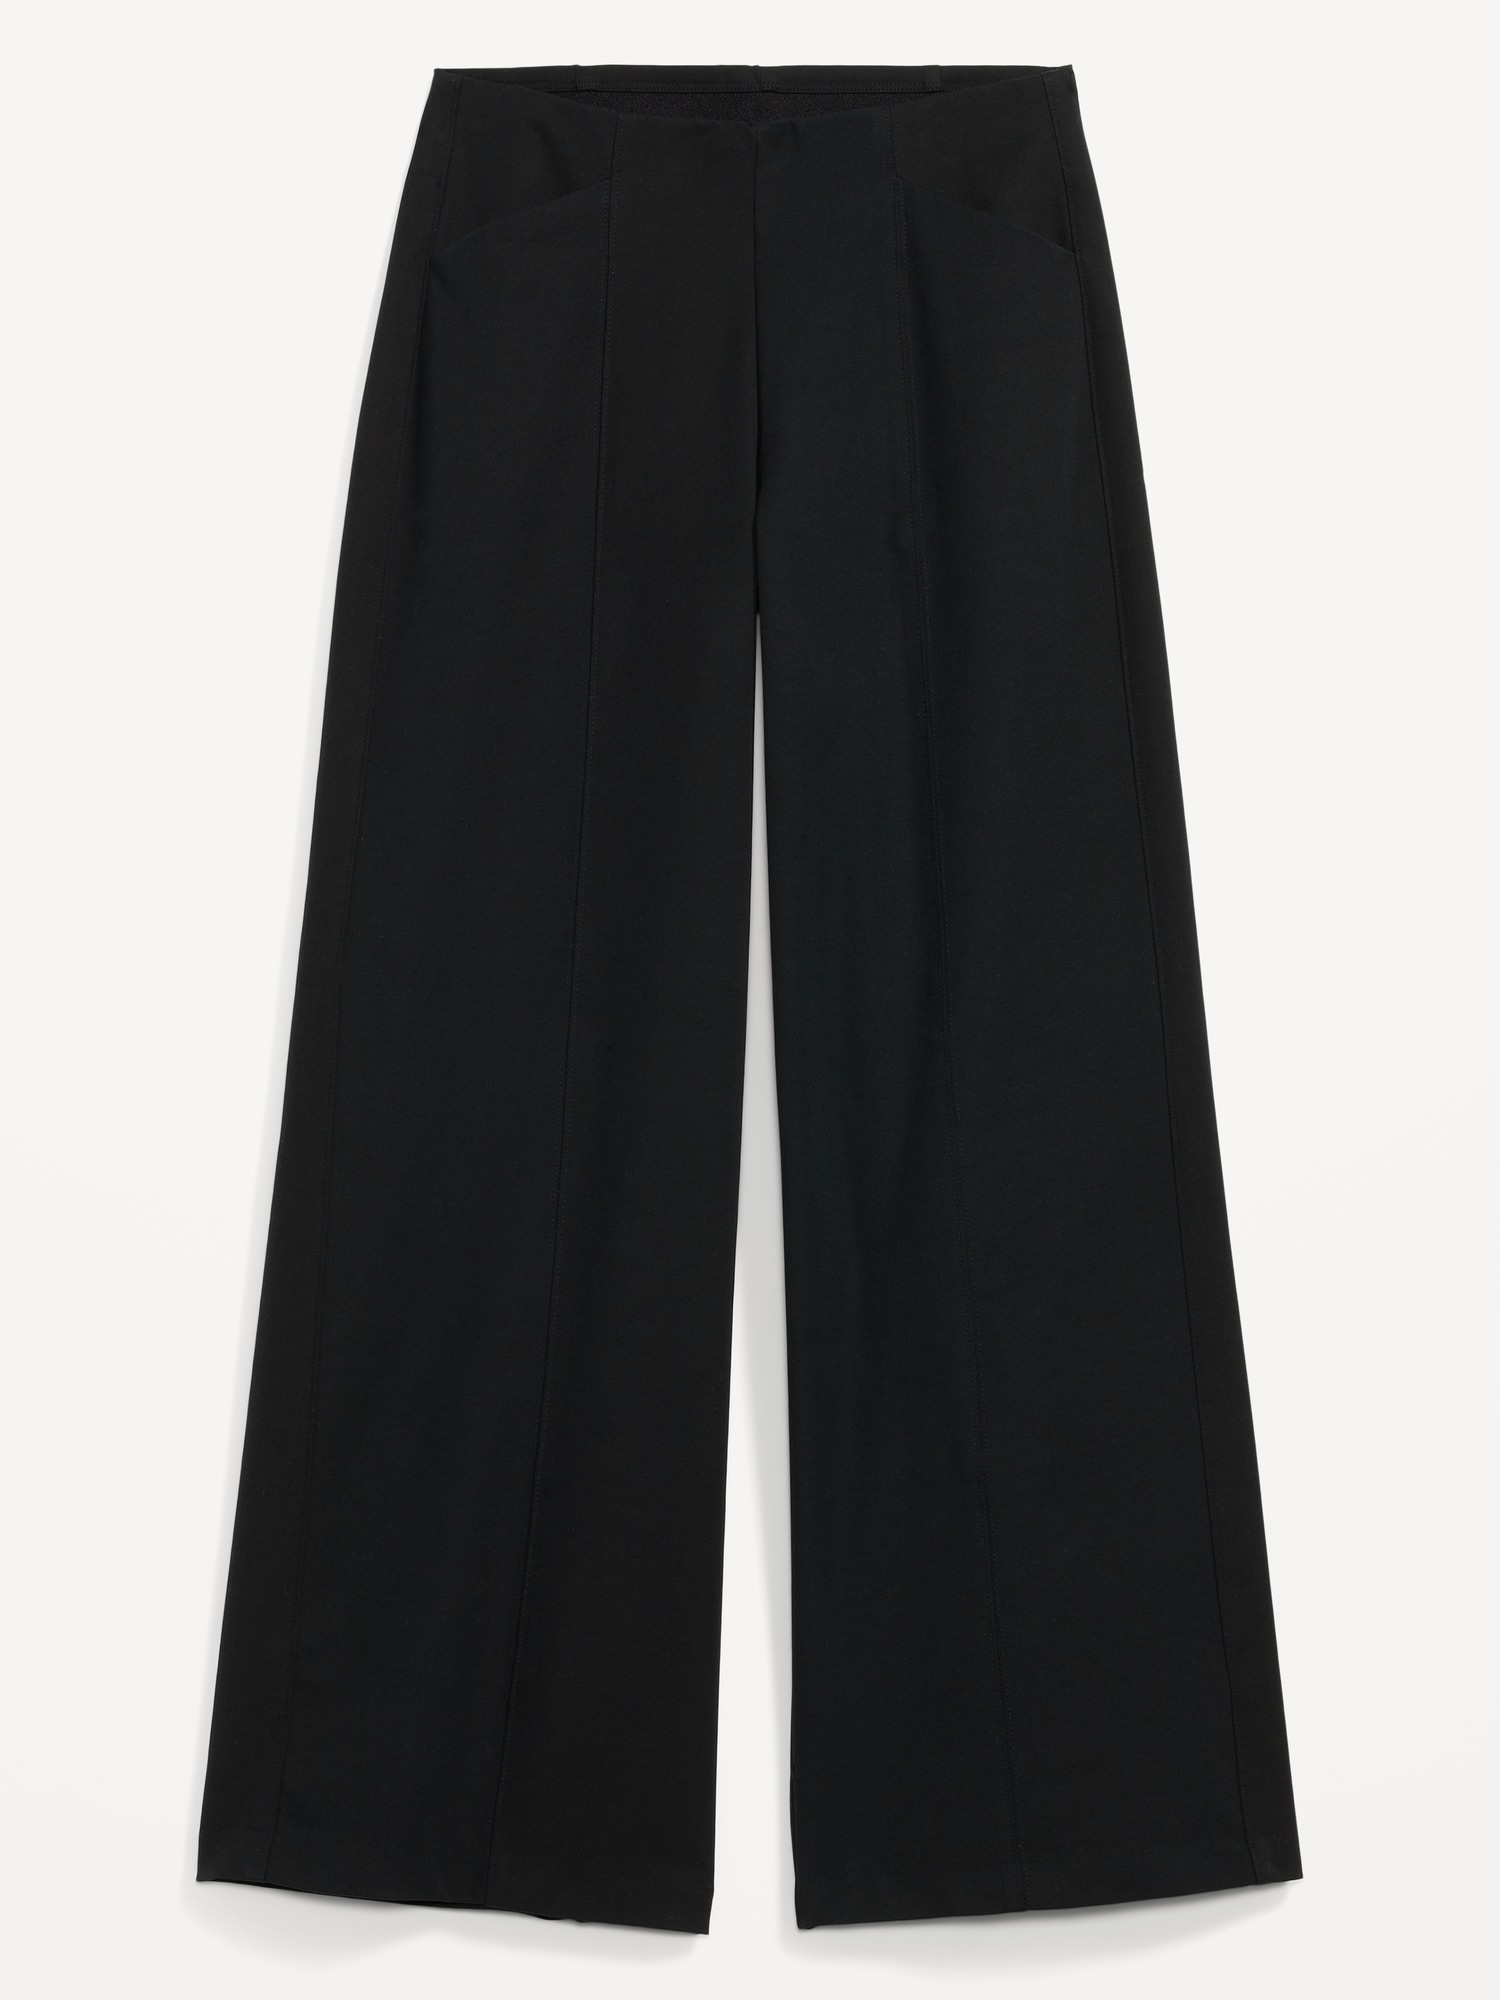 High-Waisted Pull-On Pixie Wide-Leg Pants for Women - Old Navy